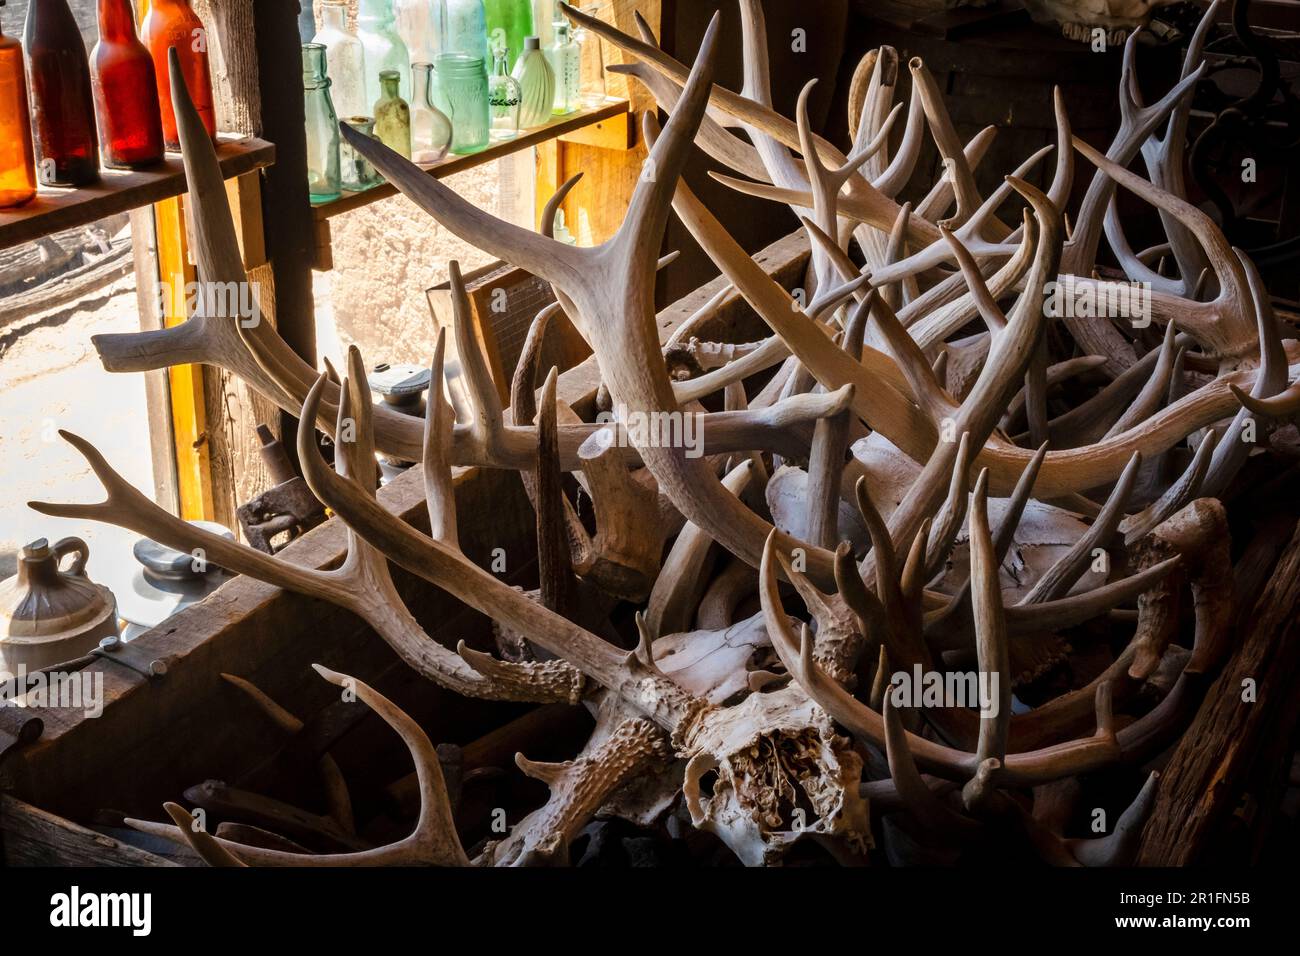 Deer antlers at the Turquoise Mining Museum in Cerrillos, New Mexico, USA Stock Photo